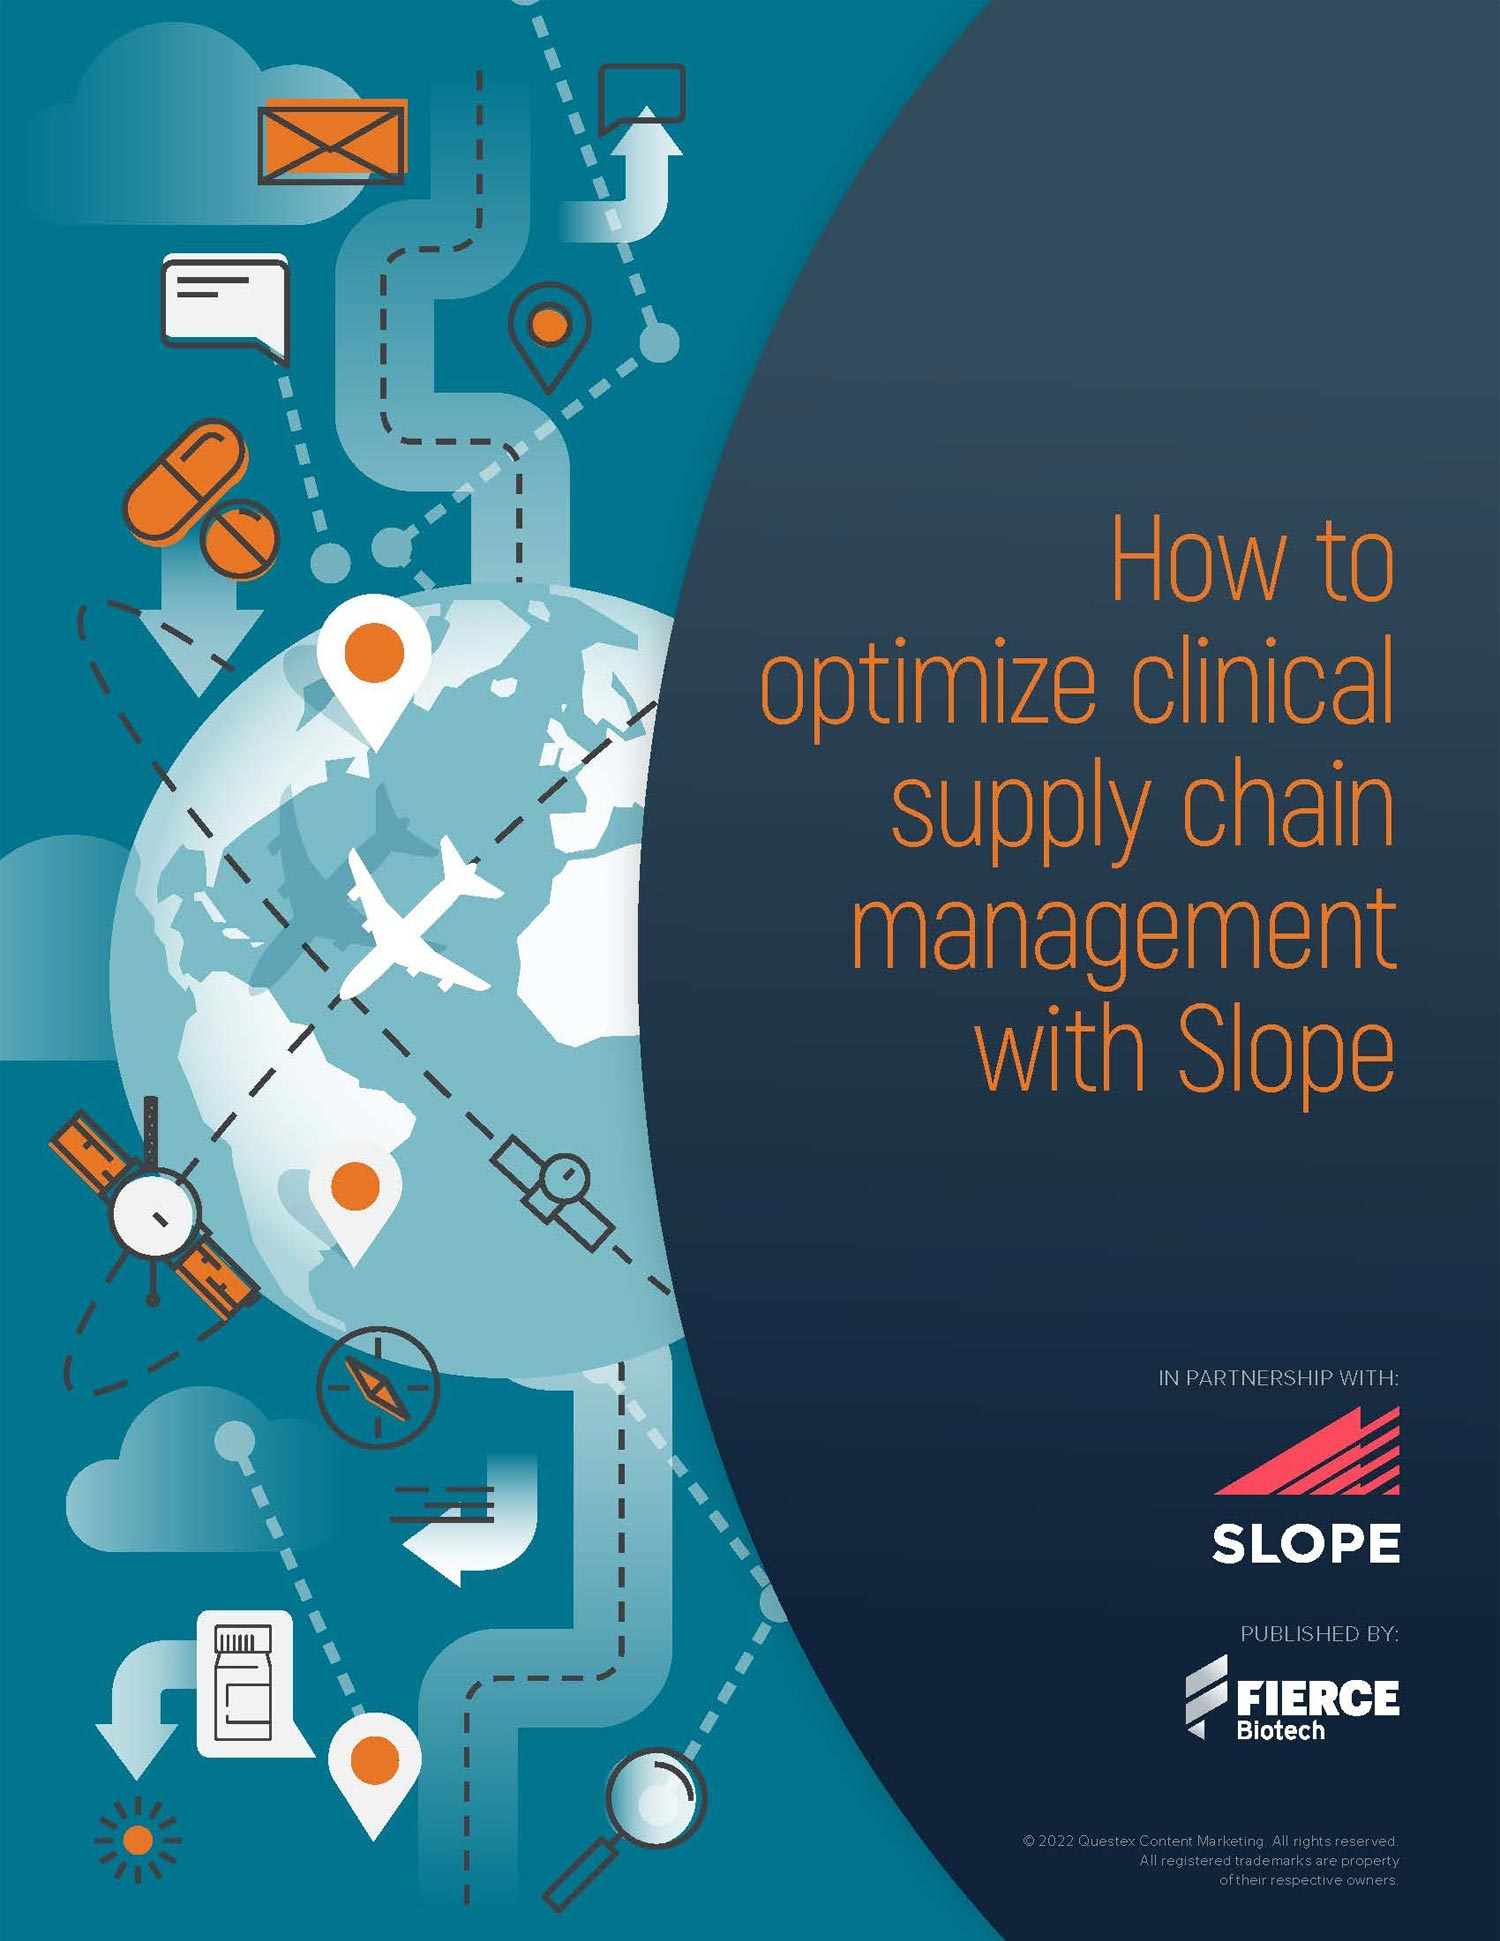 How to Optimize Clinical Supply Chain Management with Slope whitepaper